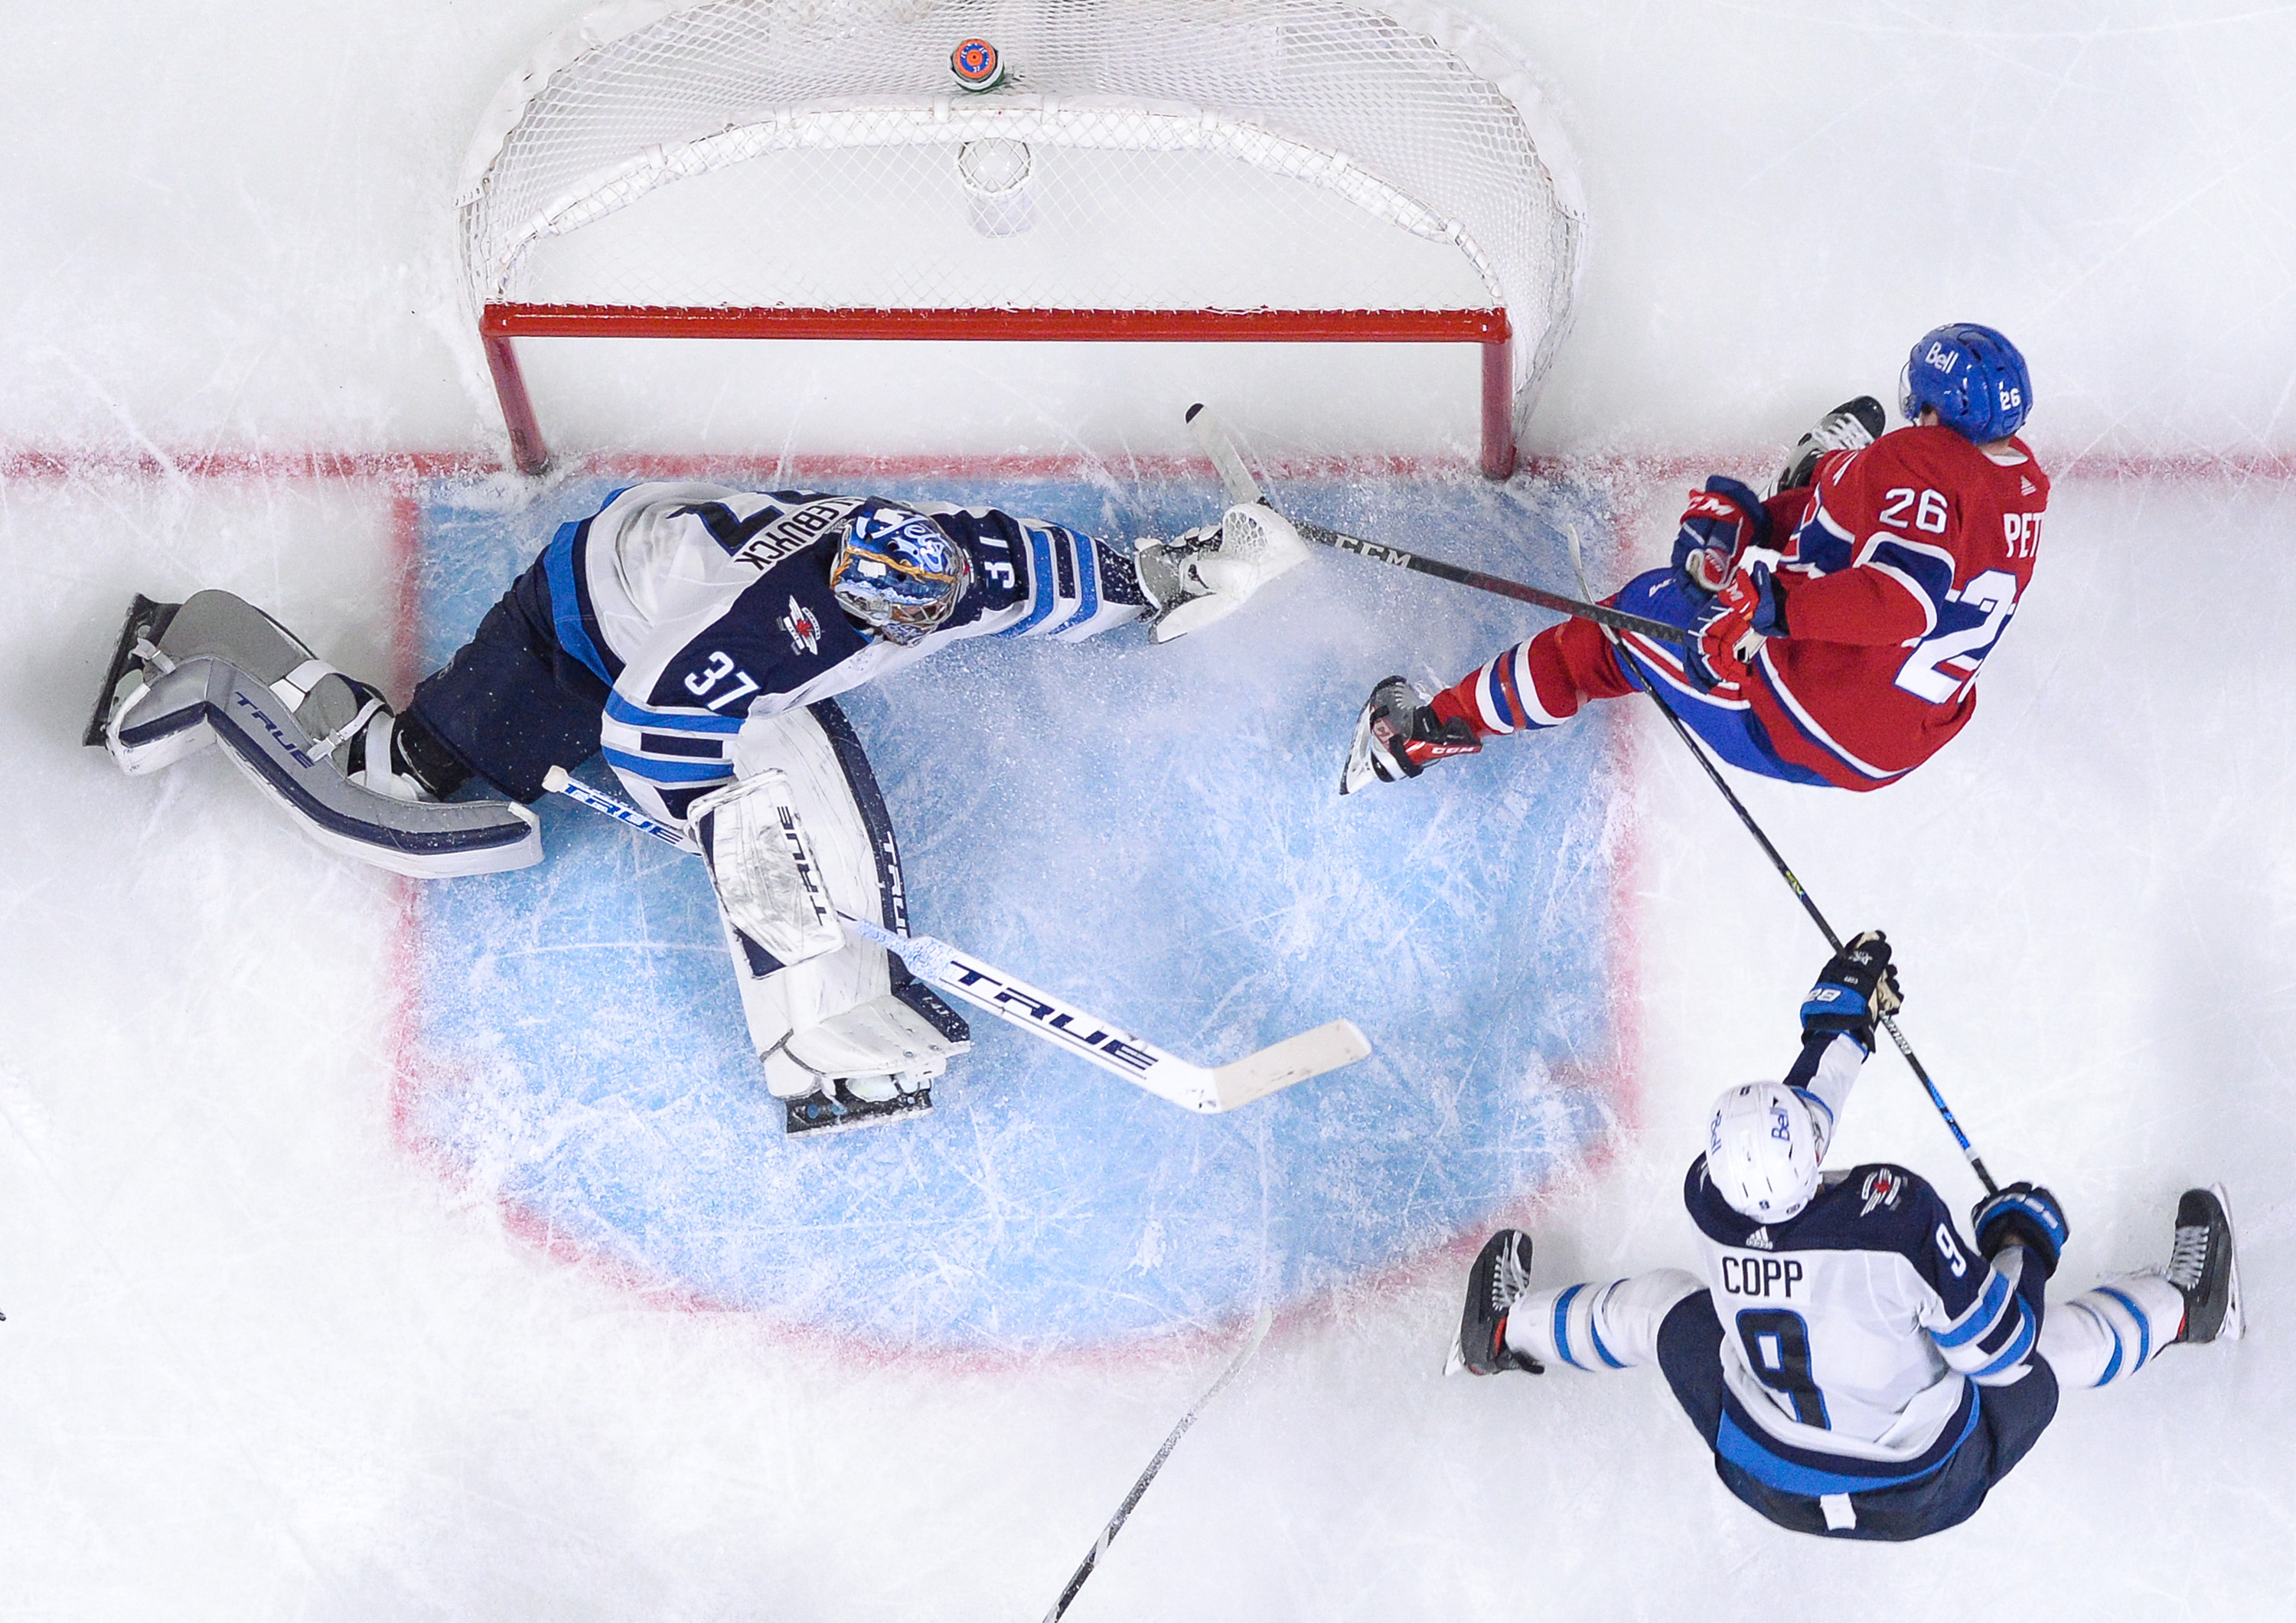 Connor Hellebuyck #37 of the Winnipeg Jets defends the goal against Jeff Petry #26 of the Montreal Canadiens in the NHL game at the Bell Centre on April 30, 2021 in Montreal, Quebec, Canada.